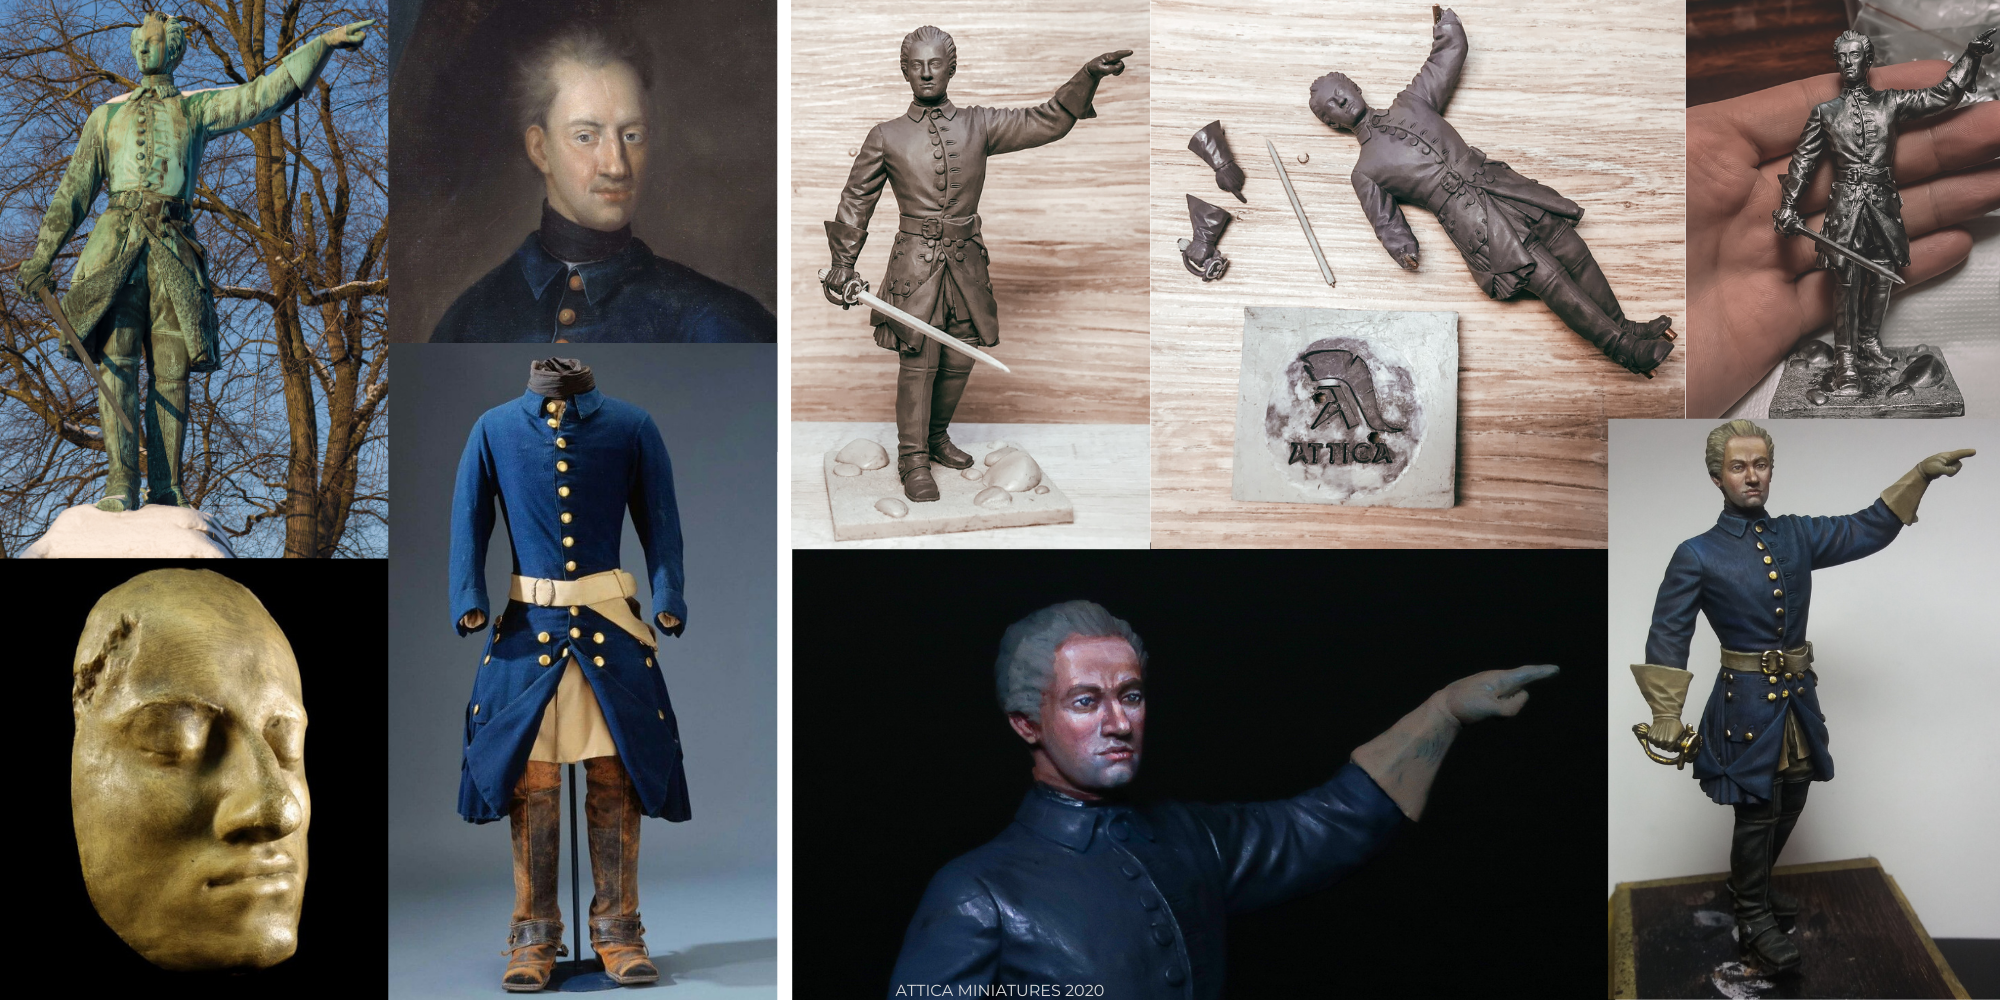 images/charles-xii/charles-12-attica-miniatures-work-in-progress.png